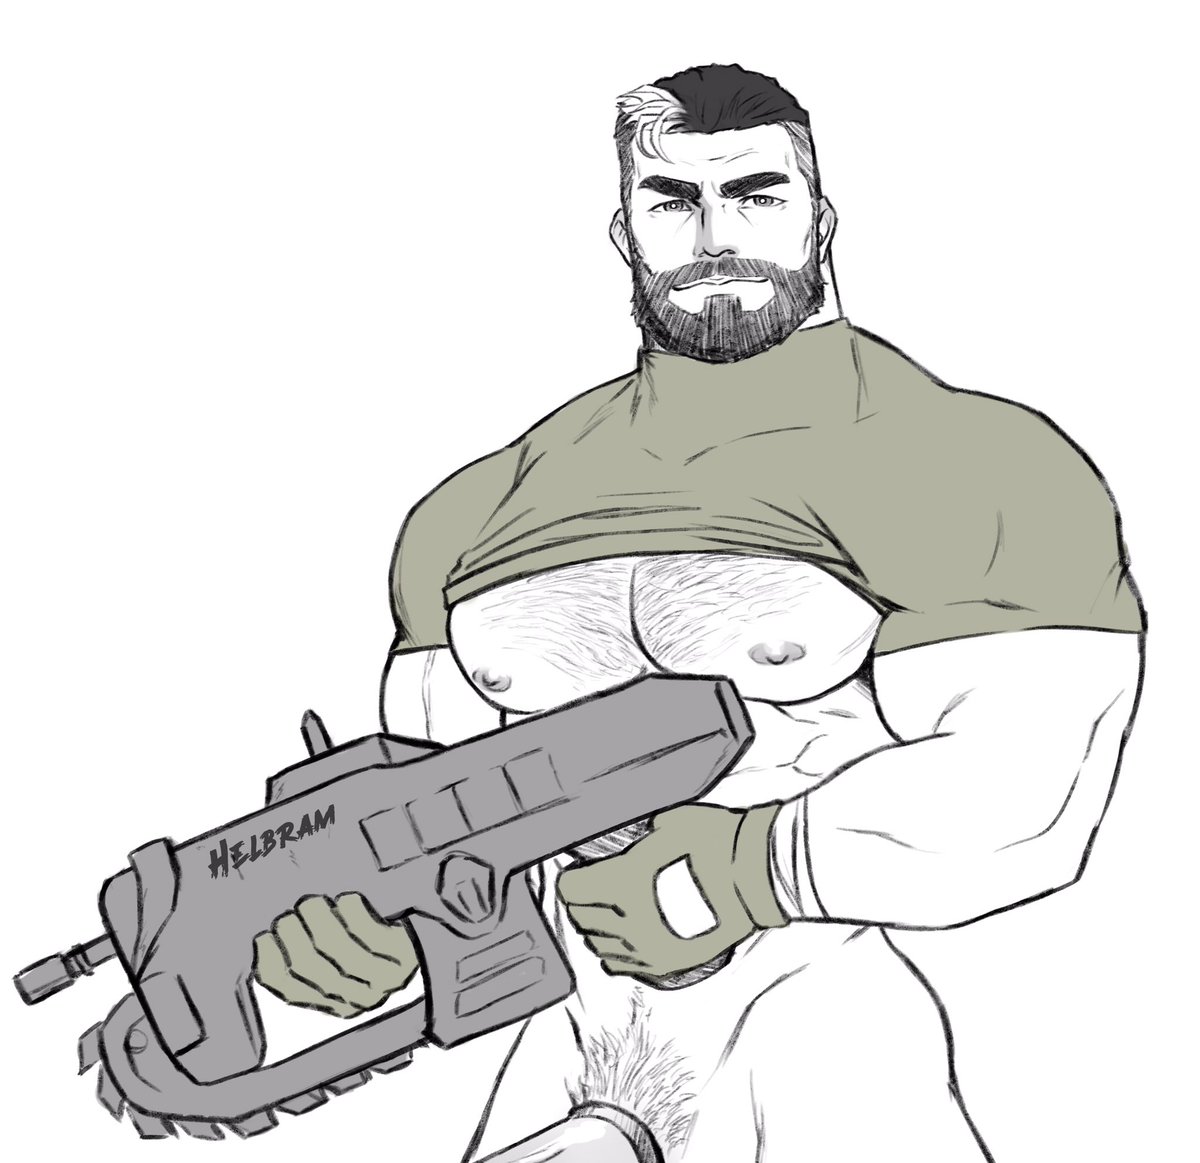 Anyways, here’s a gabe diaz sketch cus i just had to hehehe. patreon.com/he...